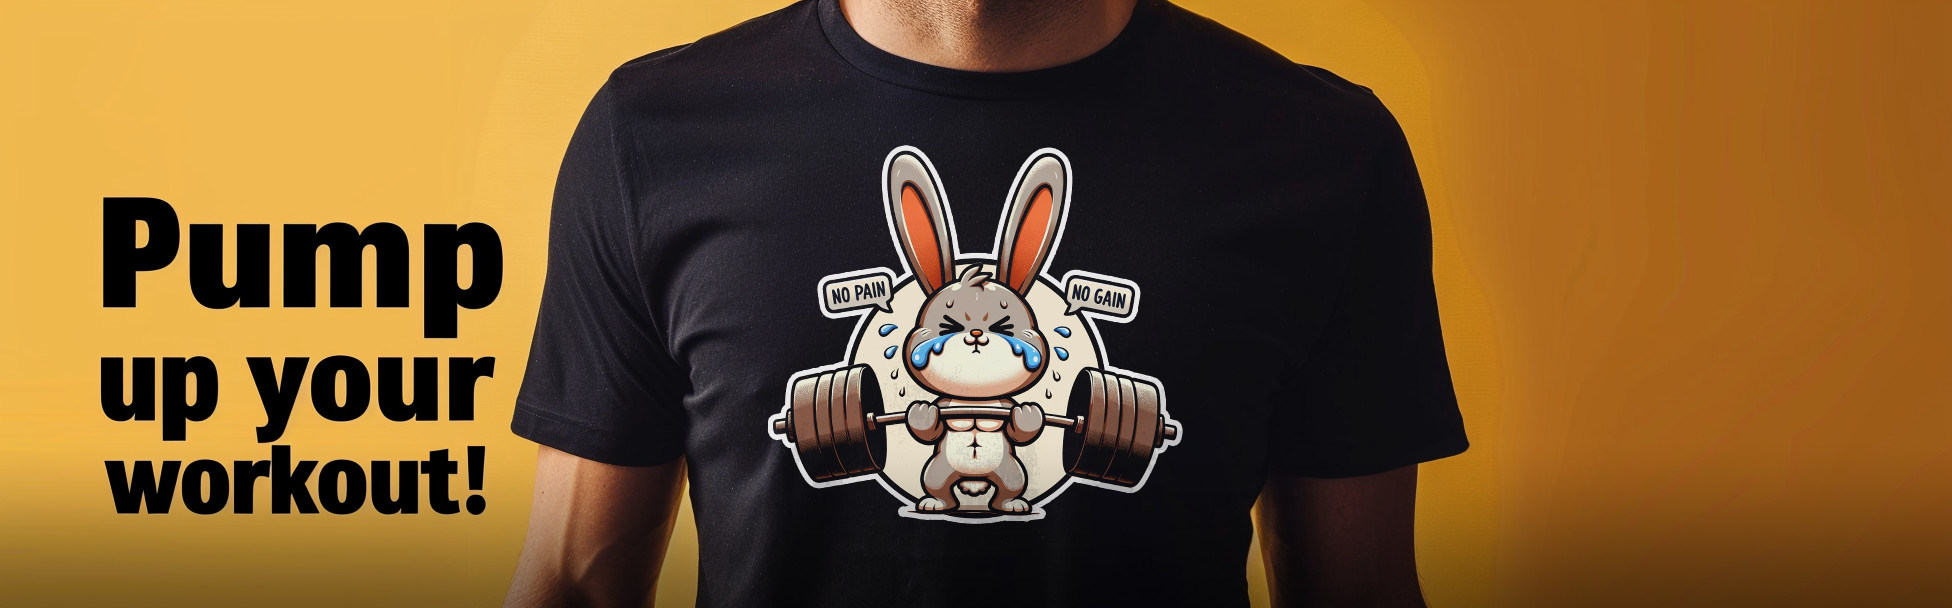 A person wearing a black t-shirt with a graphic of a determined cartoon bunny lifting weights. The shirt's design includes the motivational phrase "NO PAIN NO GAIN" in bold lettering encircling the bunny.